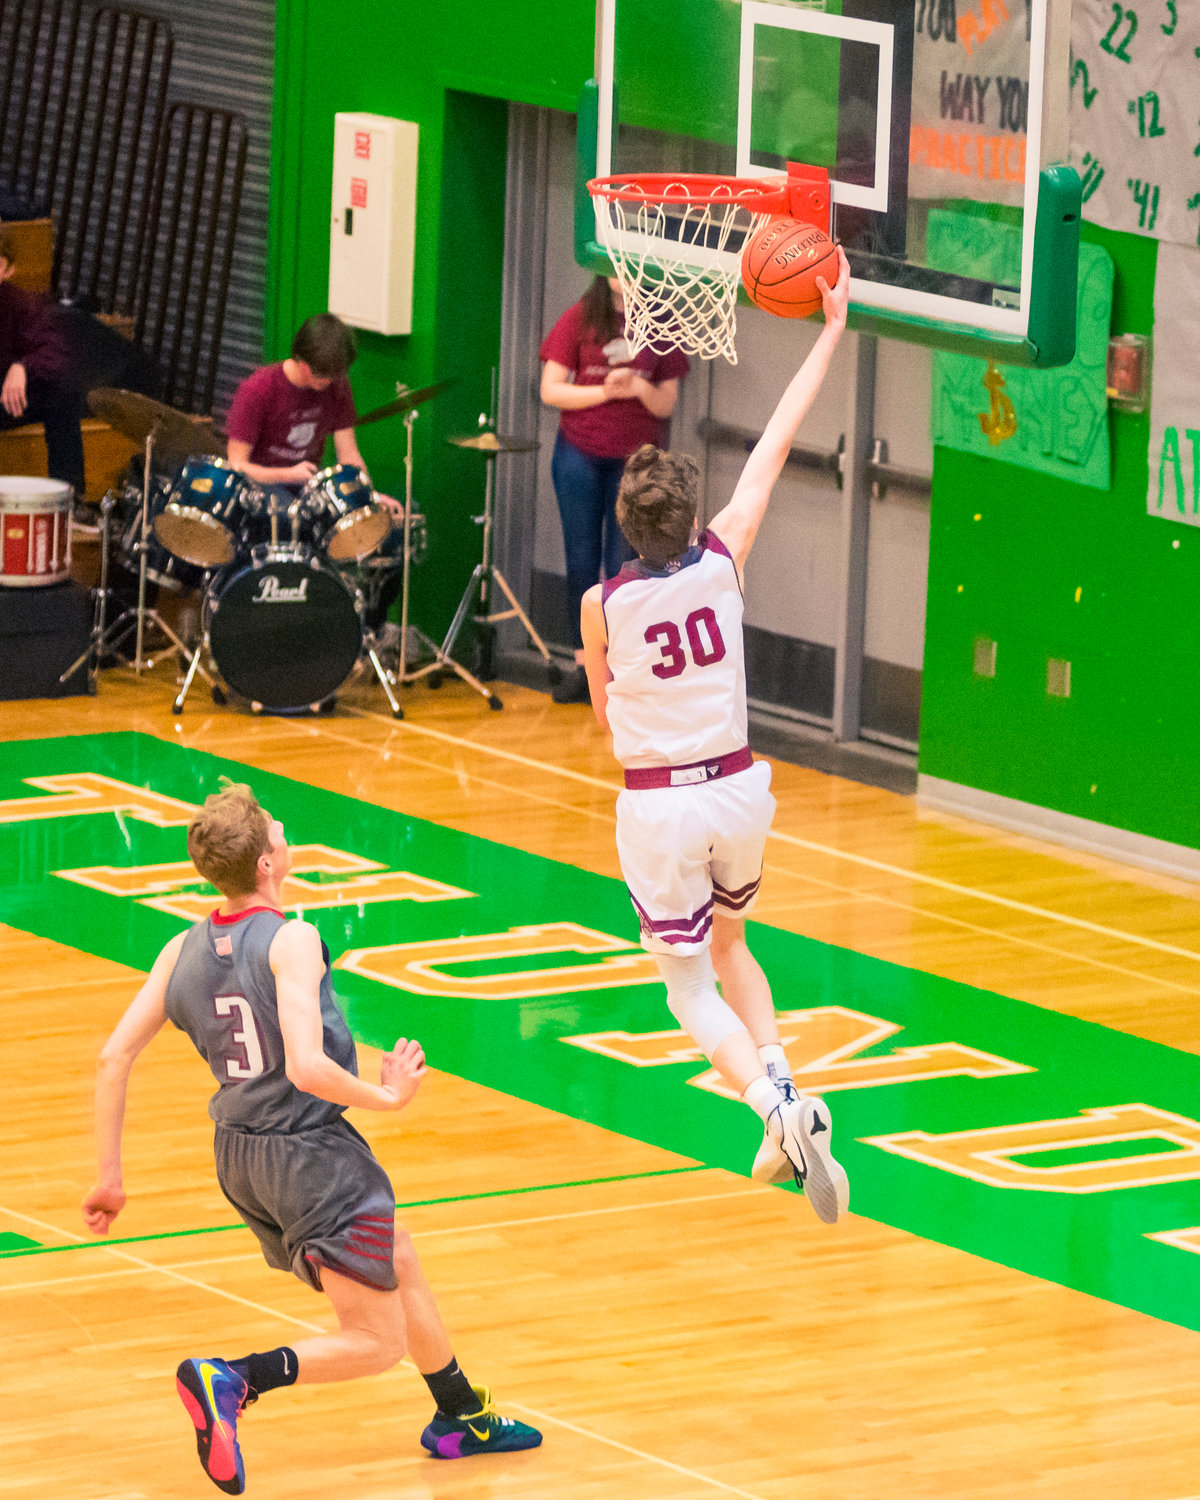 W.F. West's Tyler Speck (30) makes a layup during a game against Jacks Thursday night at Tumwater High School.